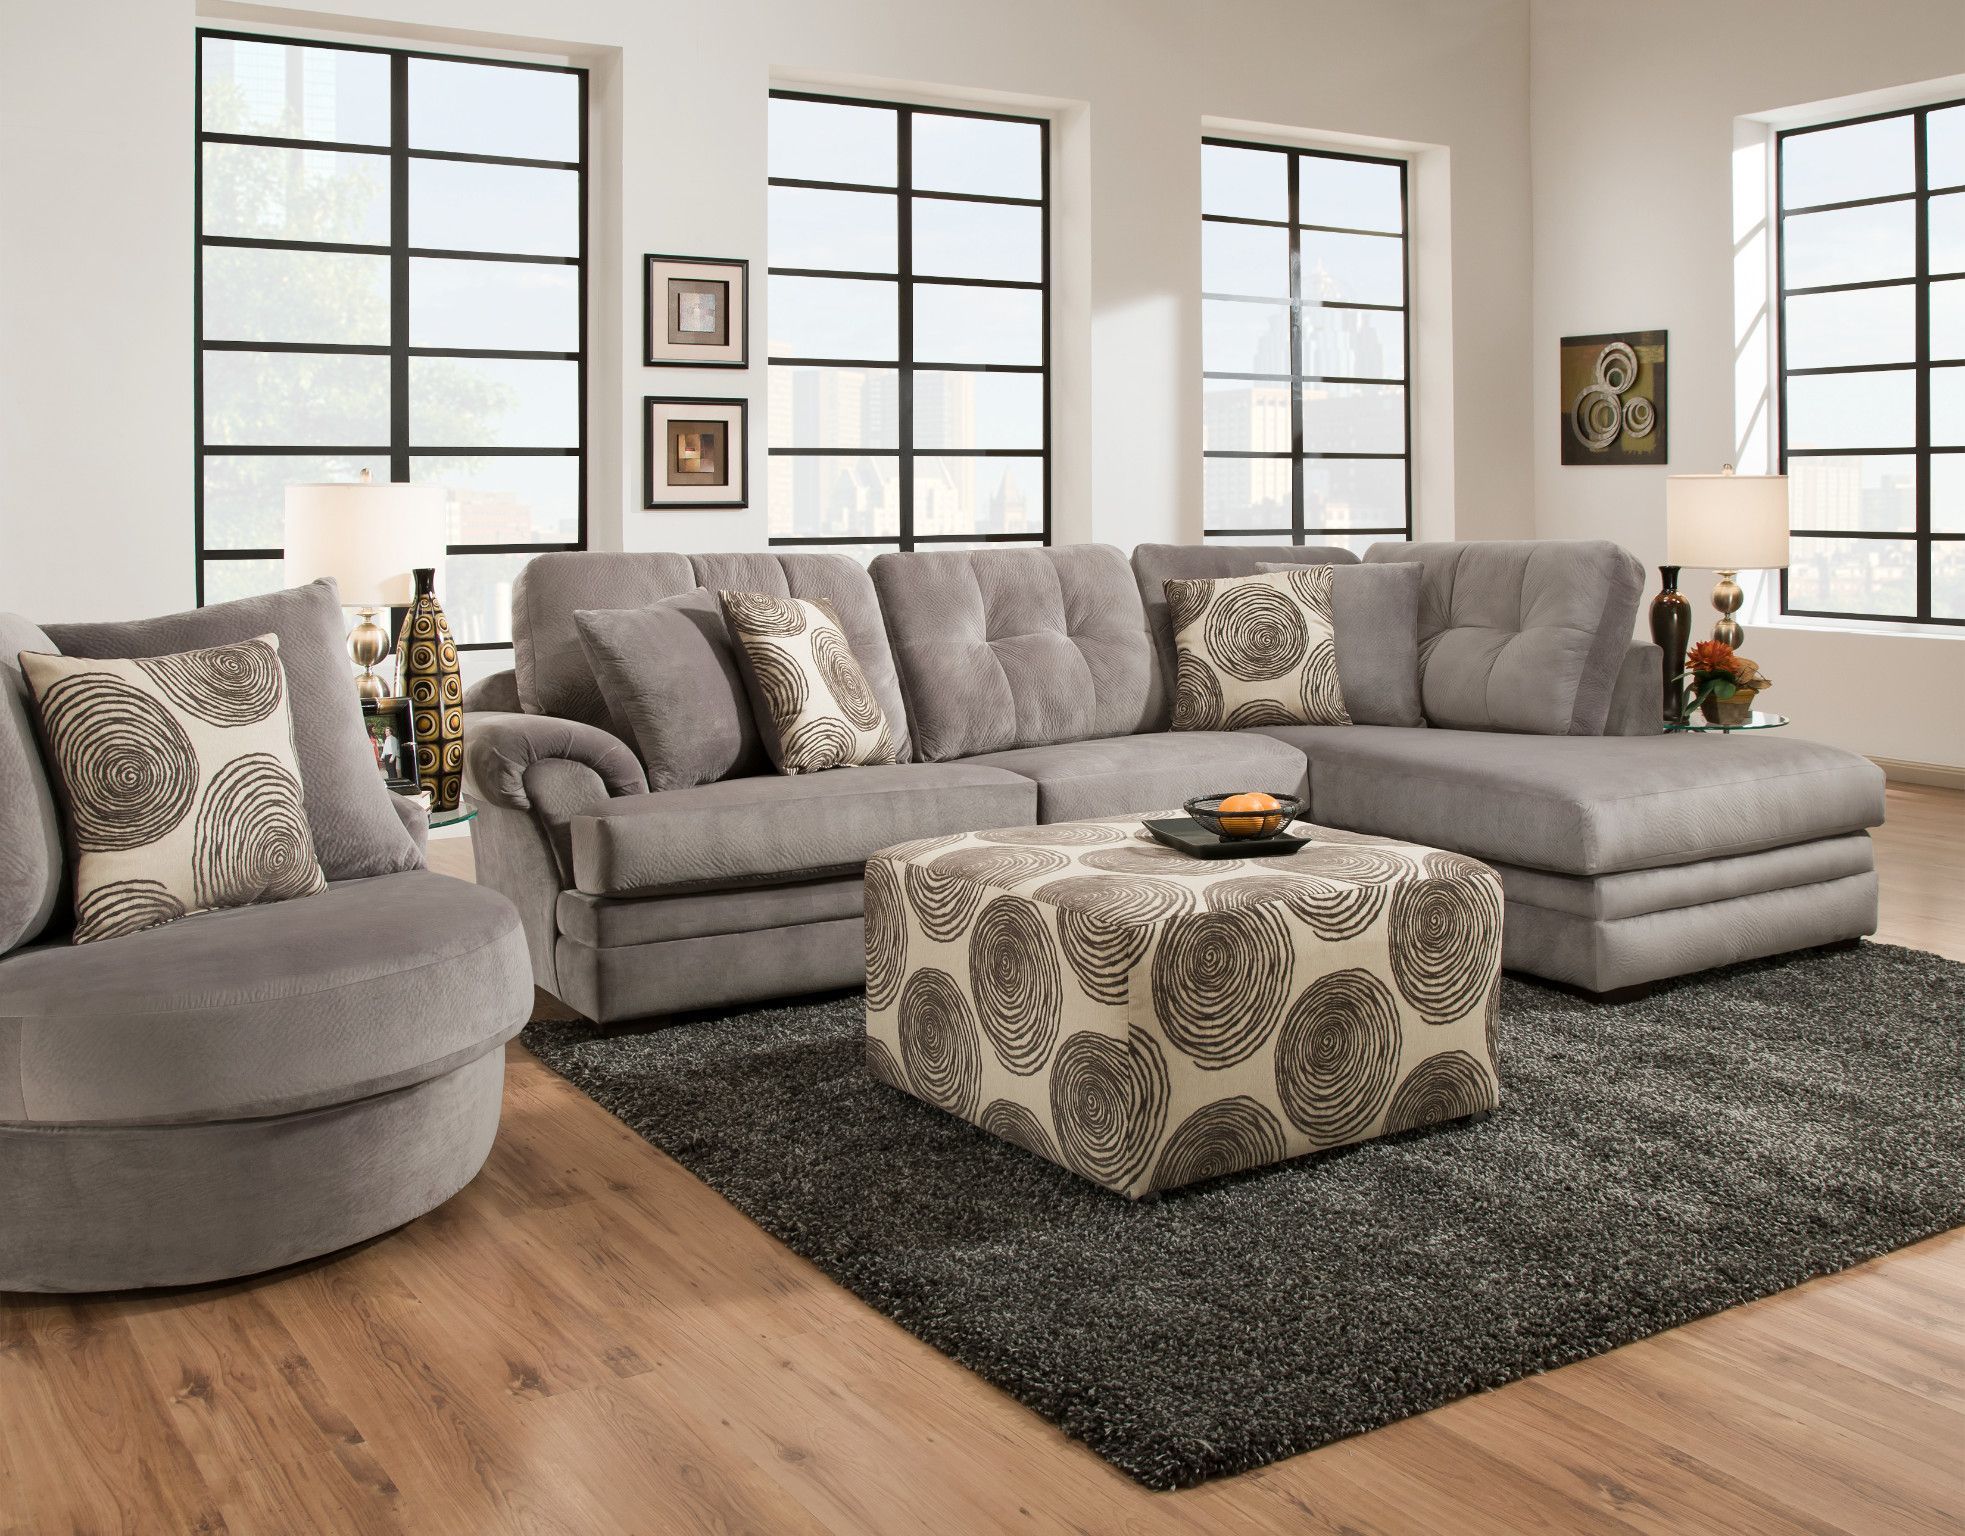 Knockout 2 Piece Sectional In Knockout Grey 16b3lf Left Facing Sofa Pertaining To Dark Gray Sectional Sofas (View 18 of 20)